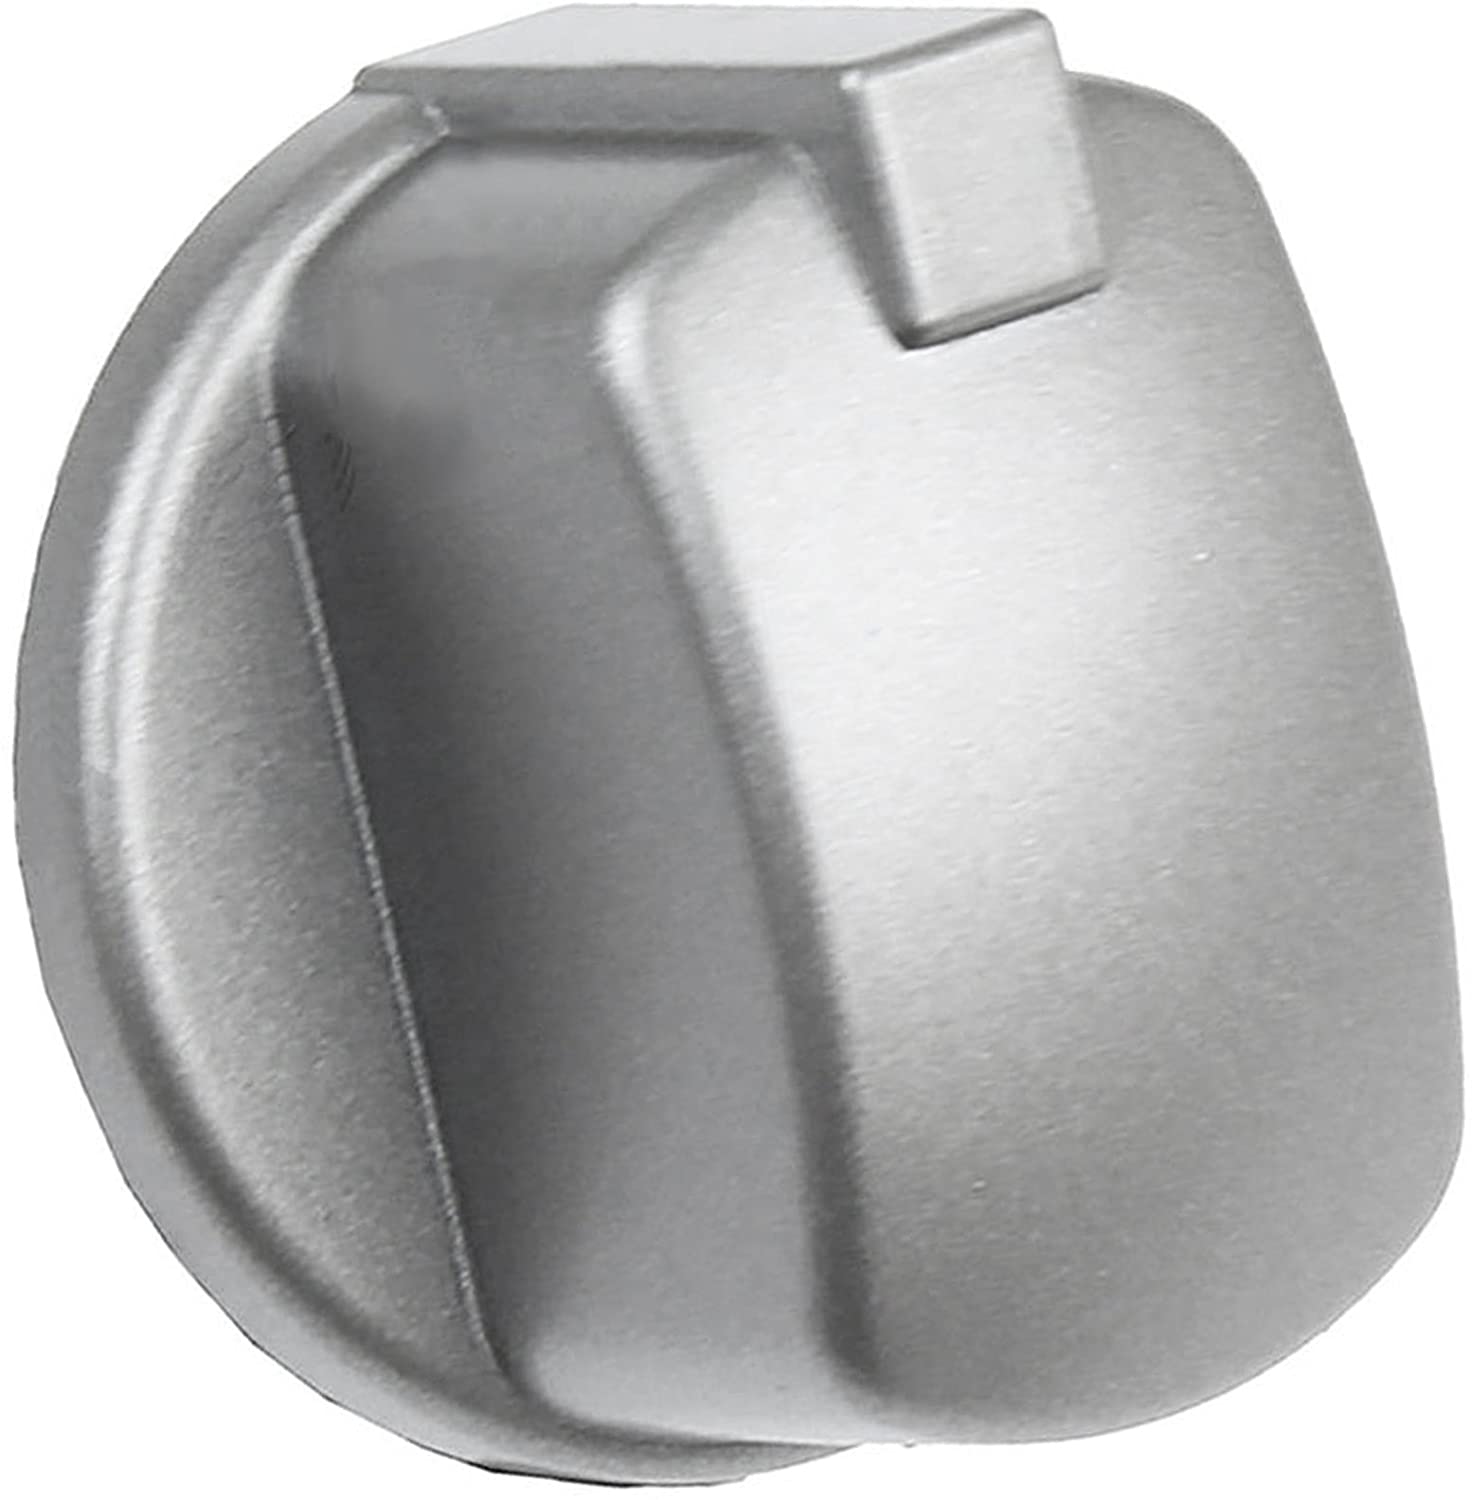 Control Knob Switch Button for HOTPOINT CIM53KCAIXGB Cooker Oven Pack of 5 (Silver/INOX)